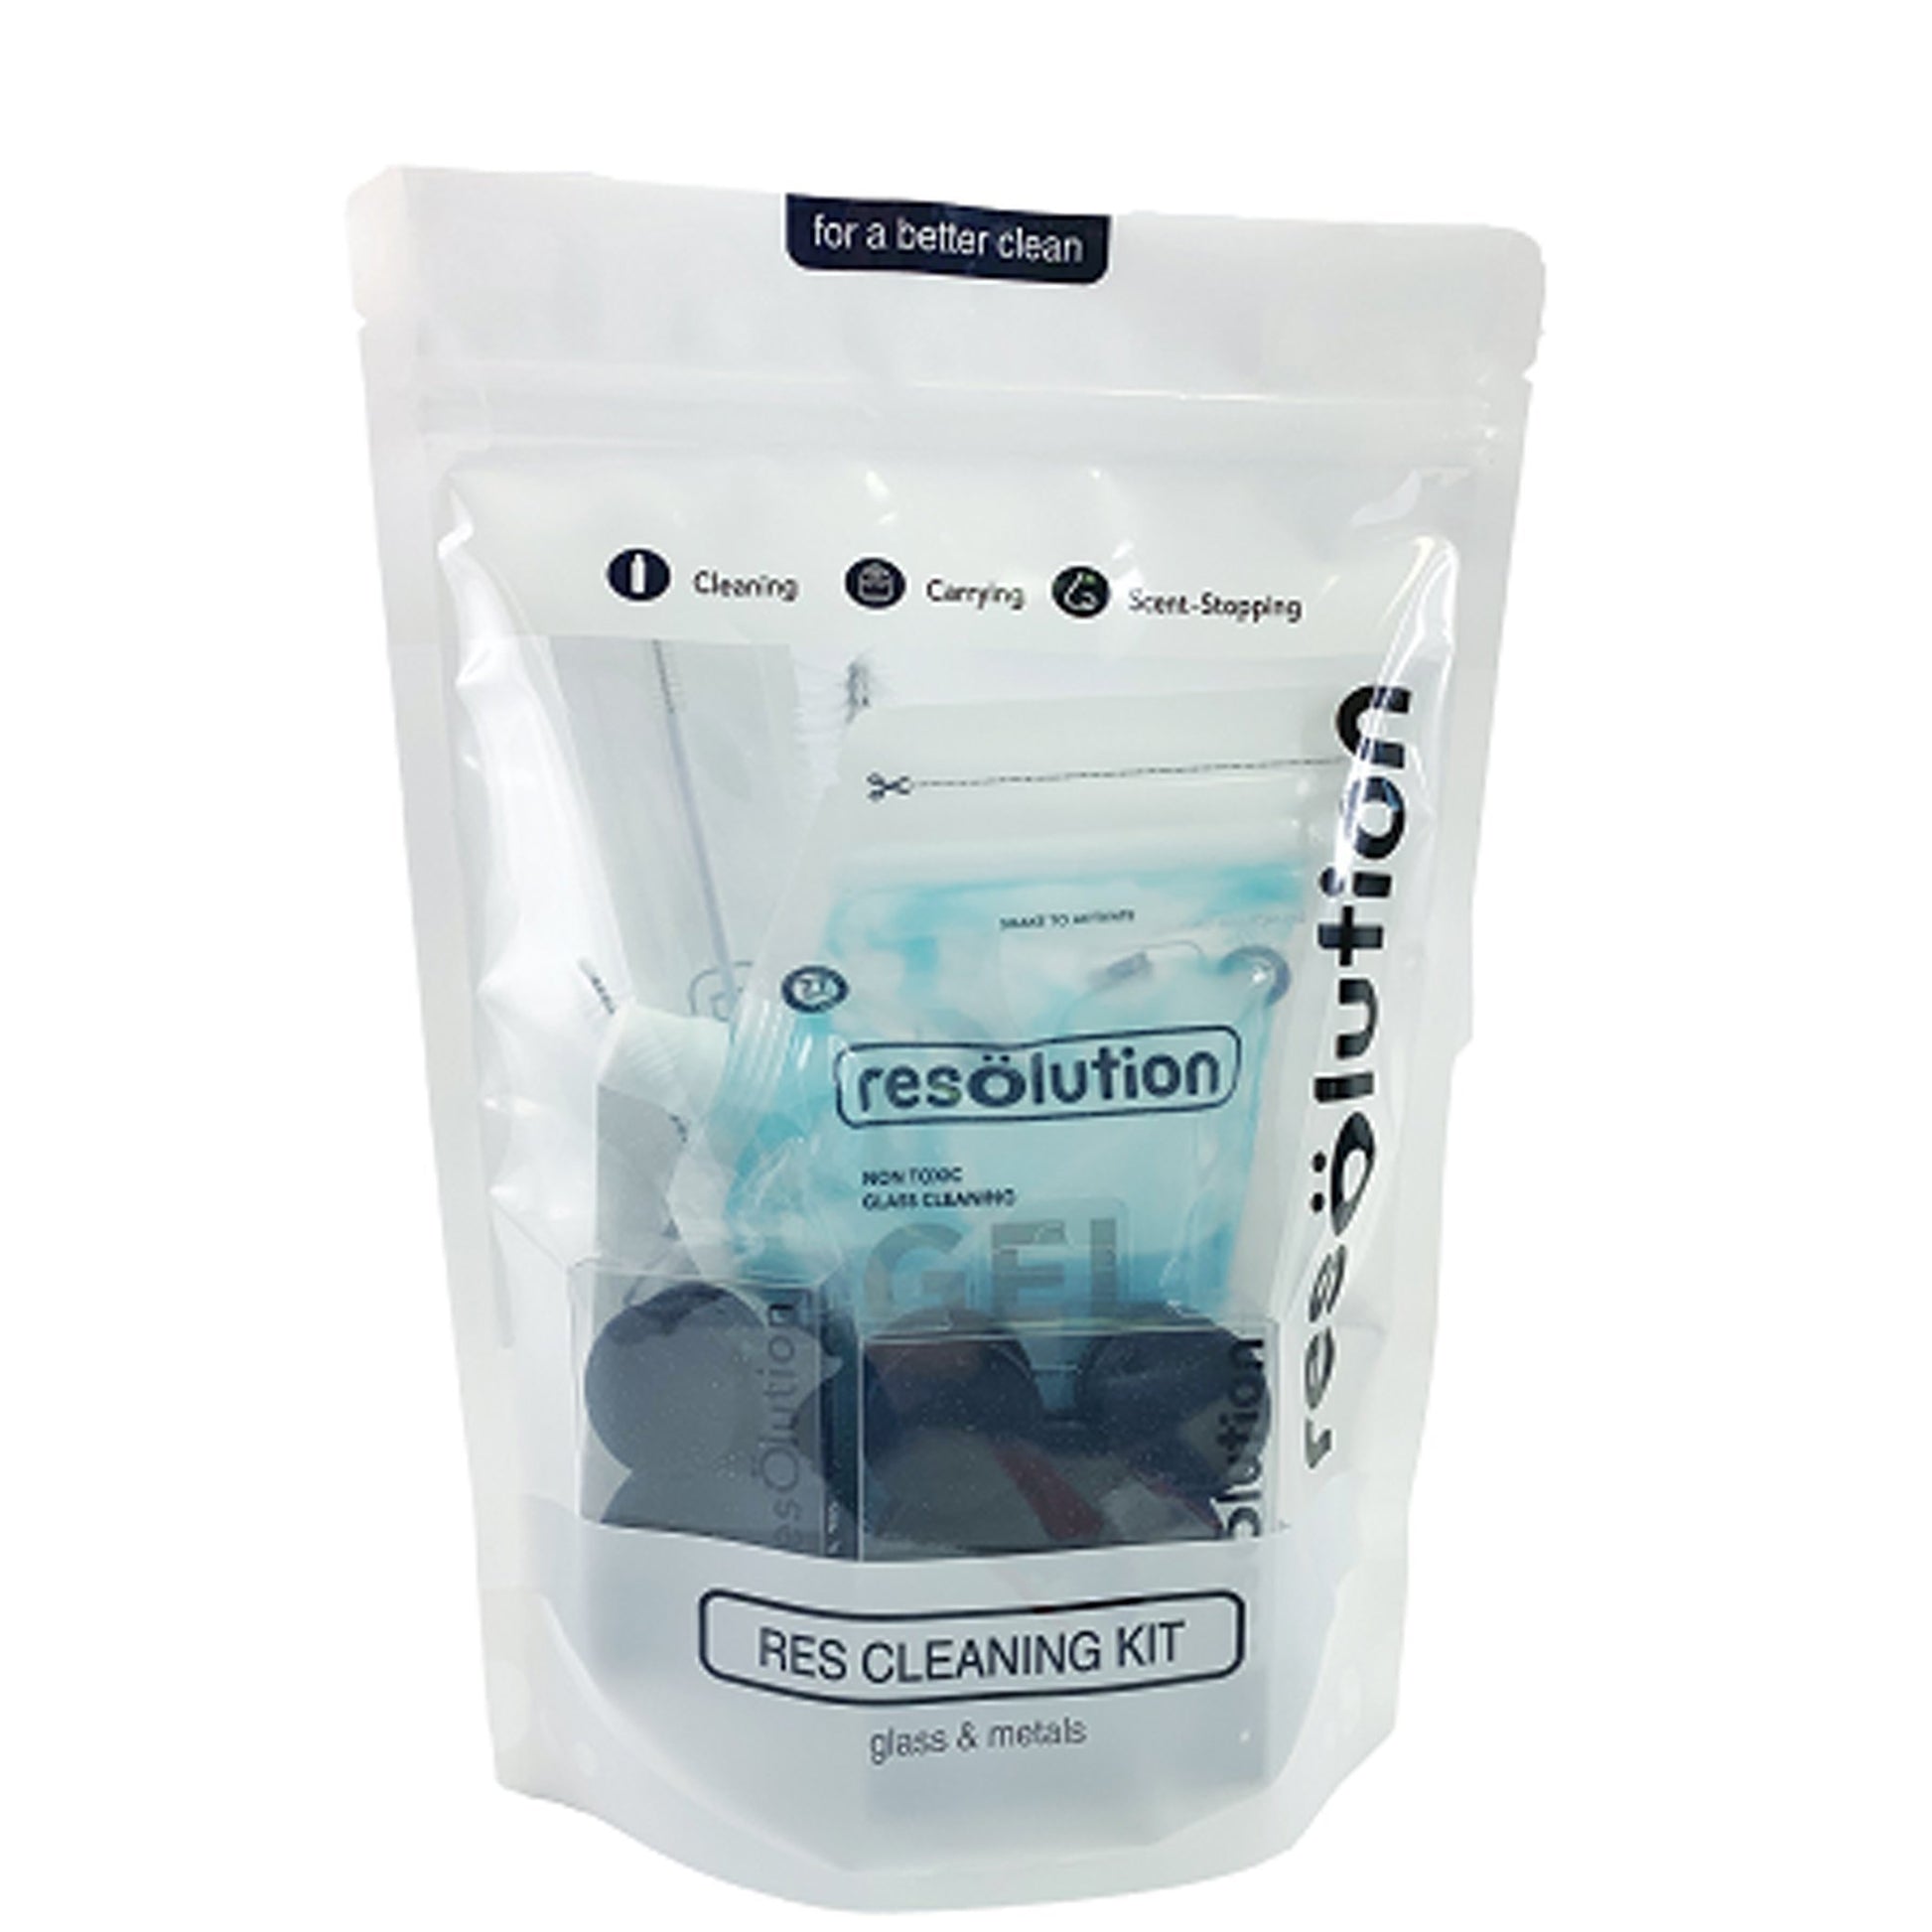 ResOlution Cleaning Kit - 12in